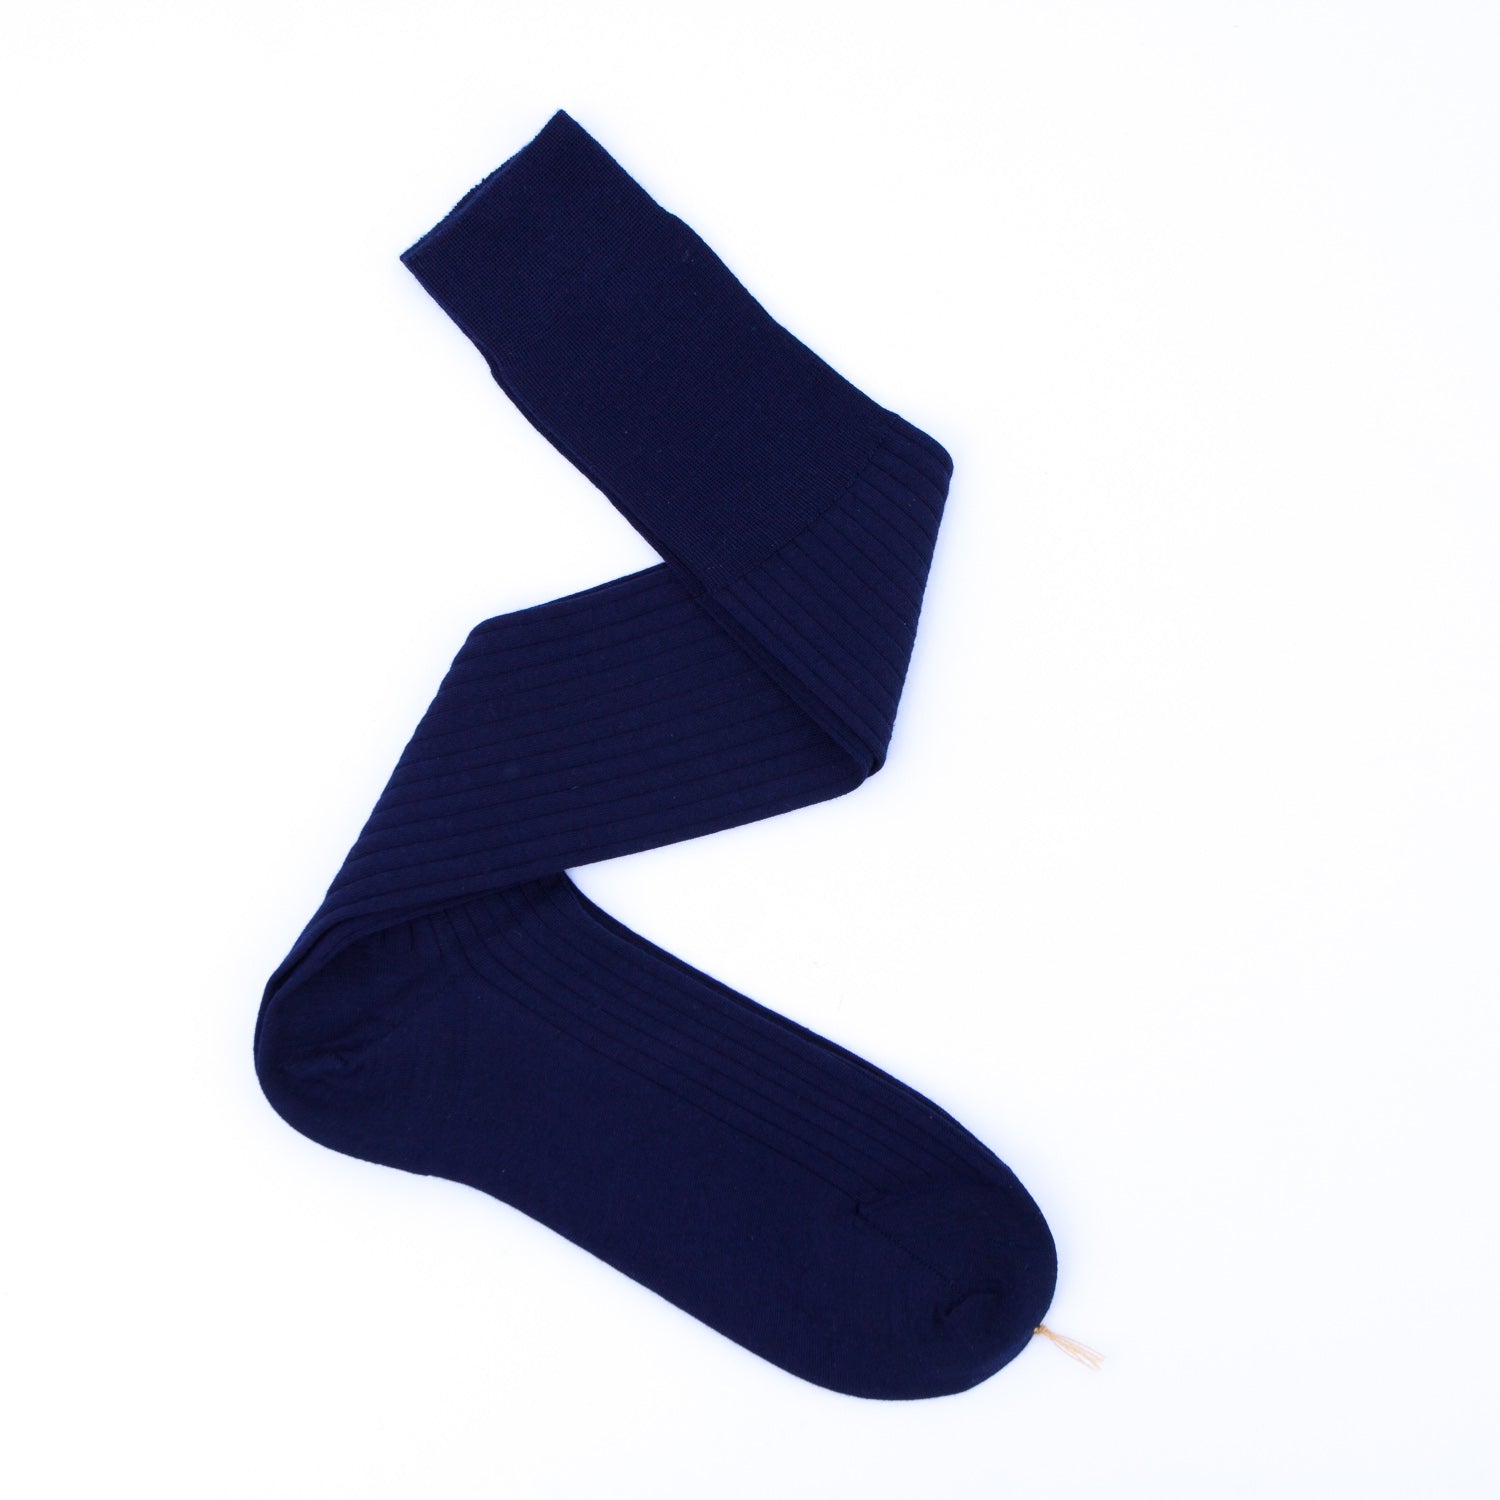 Navy 100% Pure Cashmere Over-the-Calf Socks